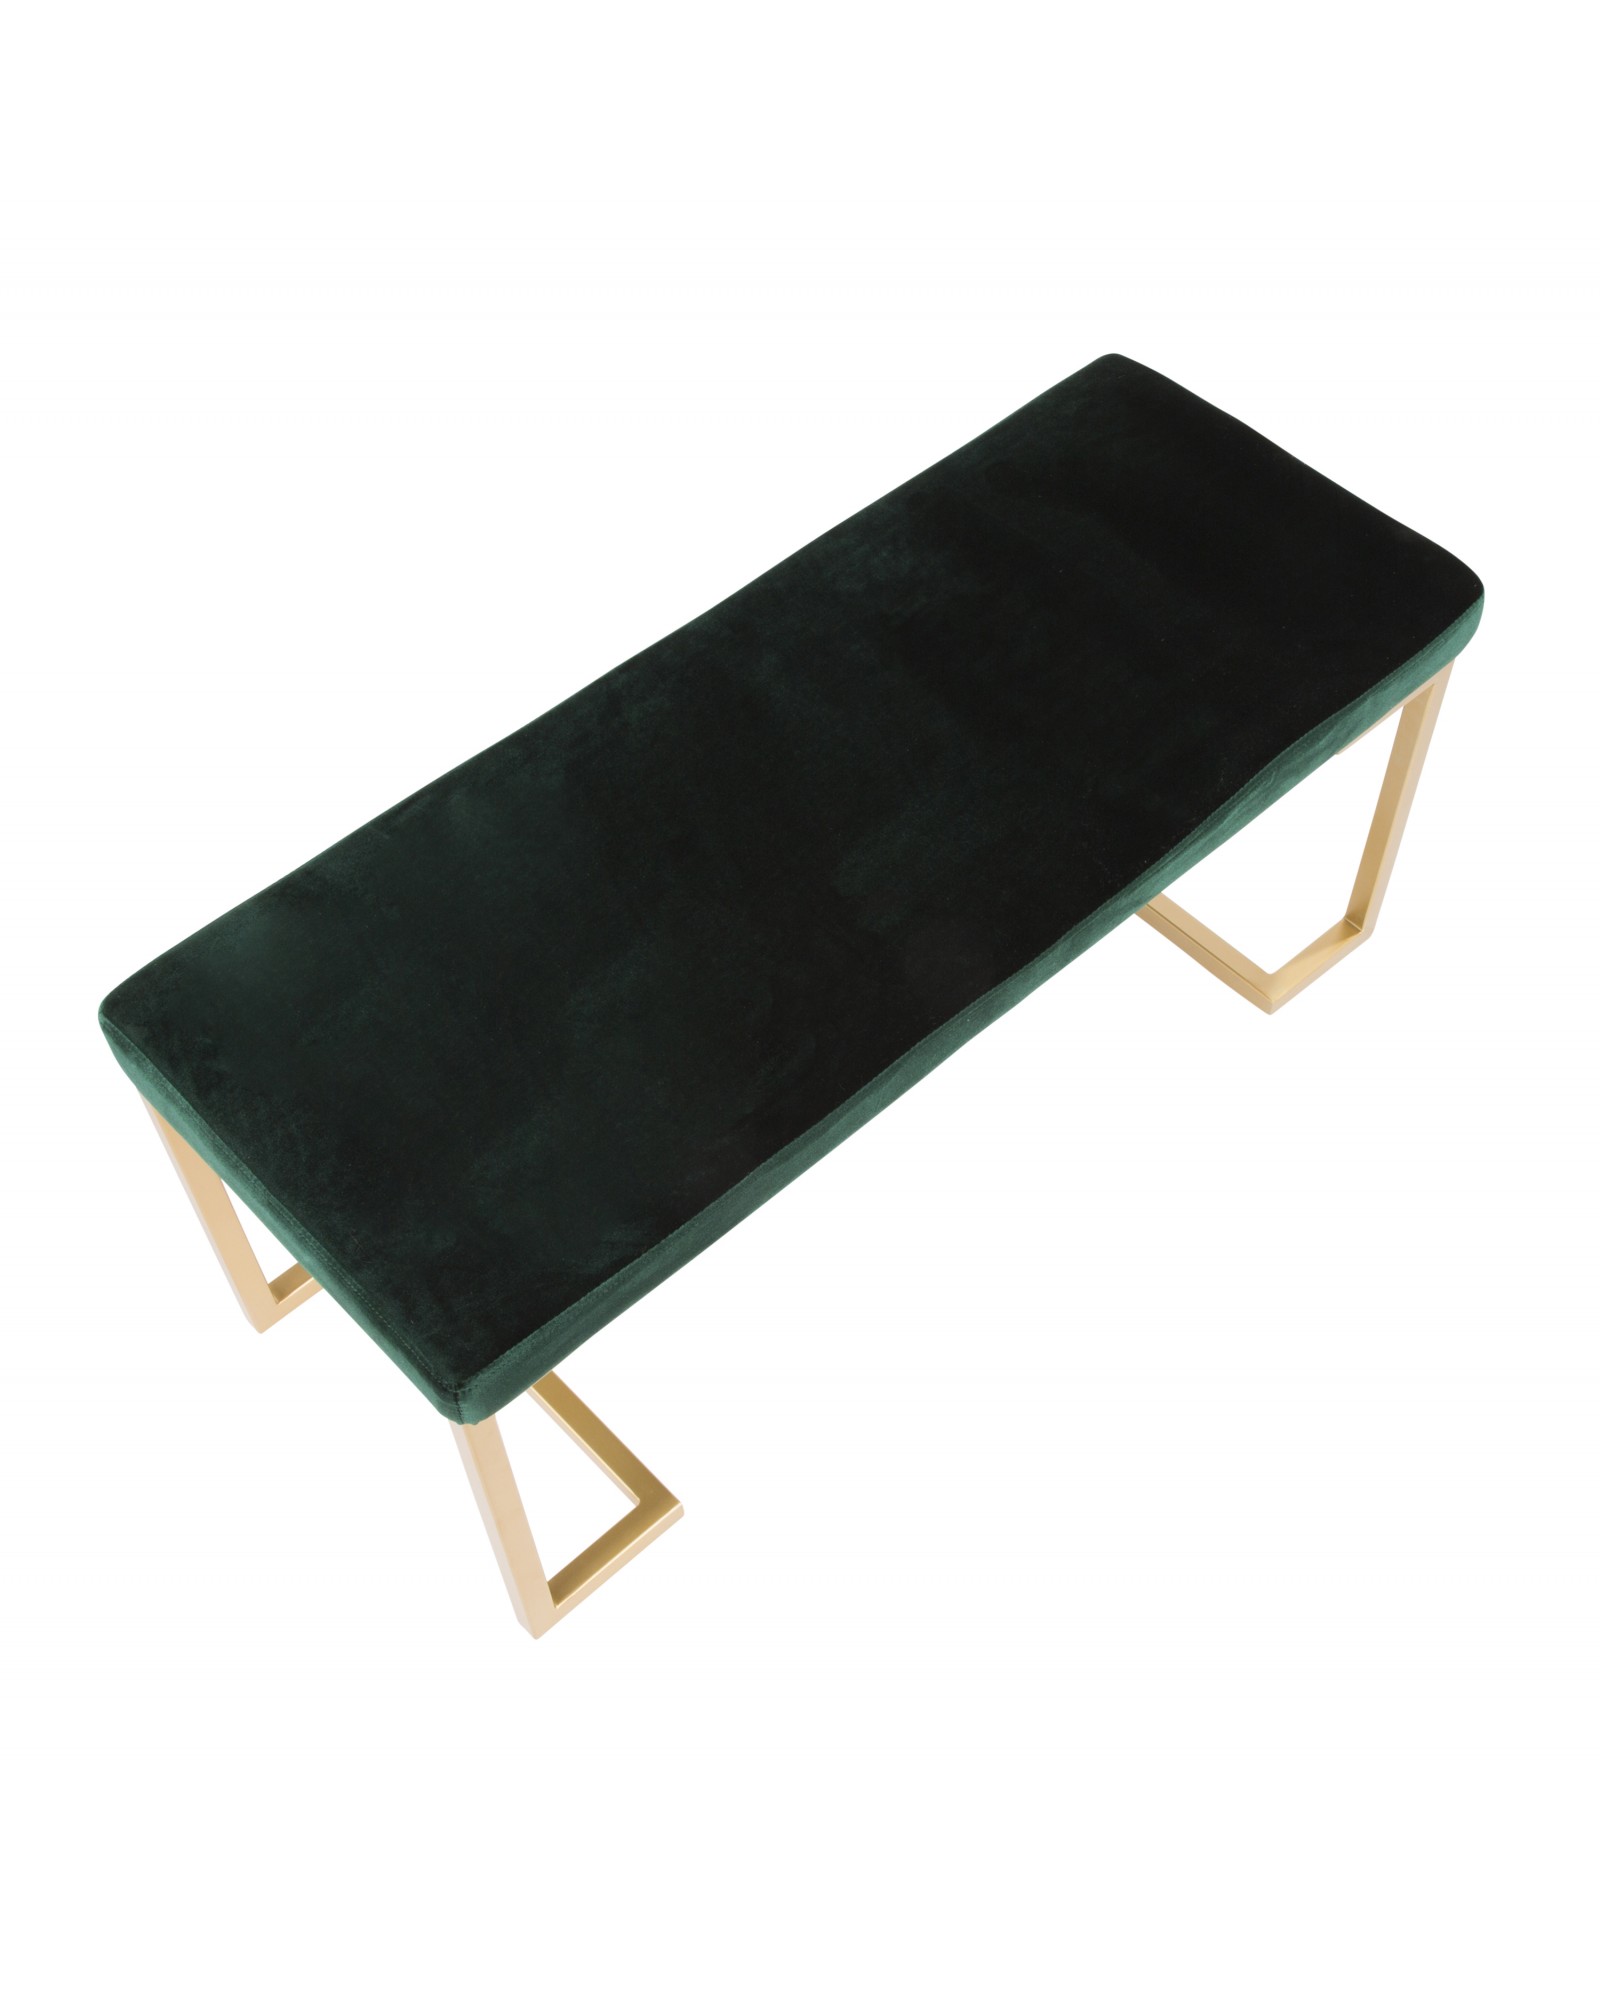 Midas Contemporary-Glam Entryway/Dining Bench in Gold with Green Velvet Cushion